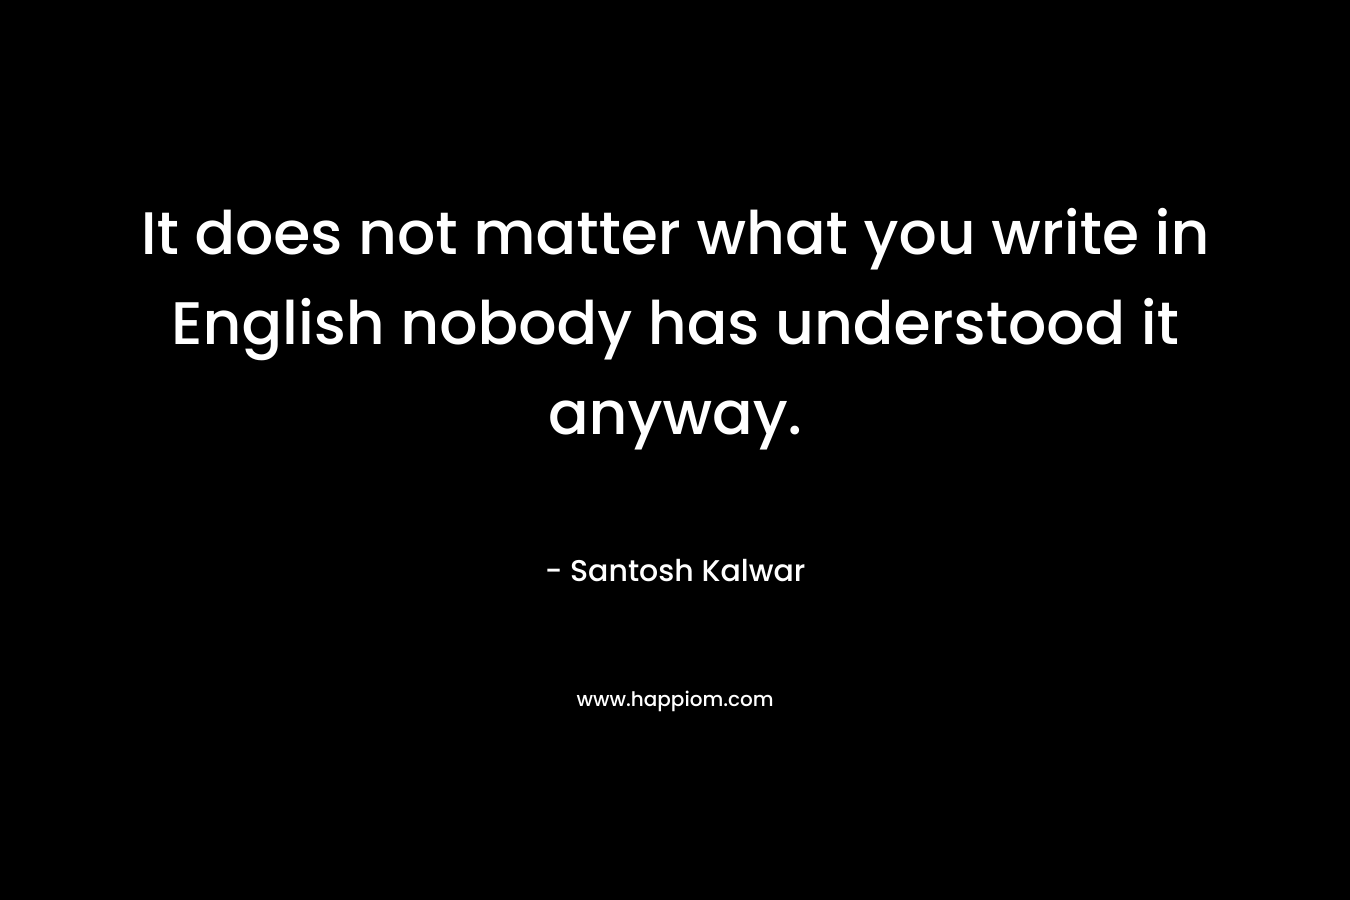 It does not matter what you write in English nobody has understood it anyway.